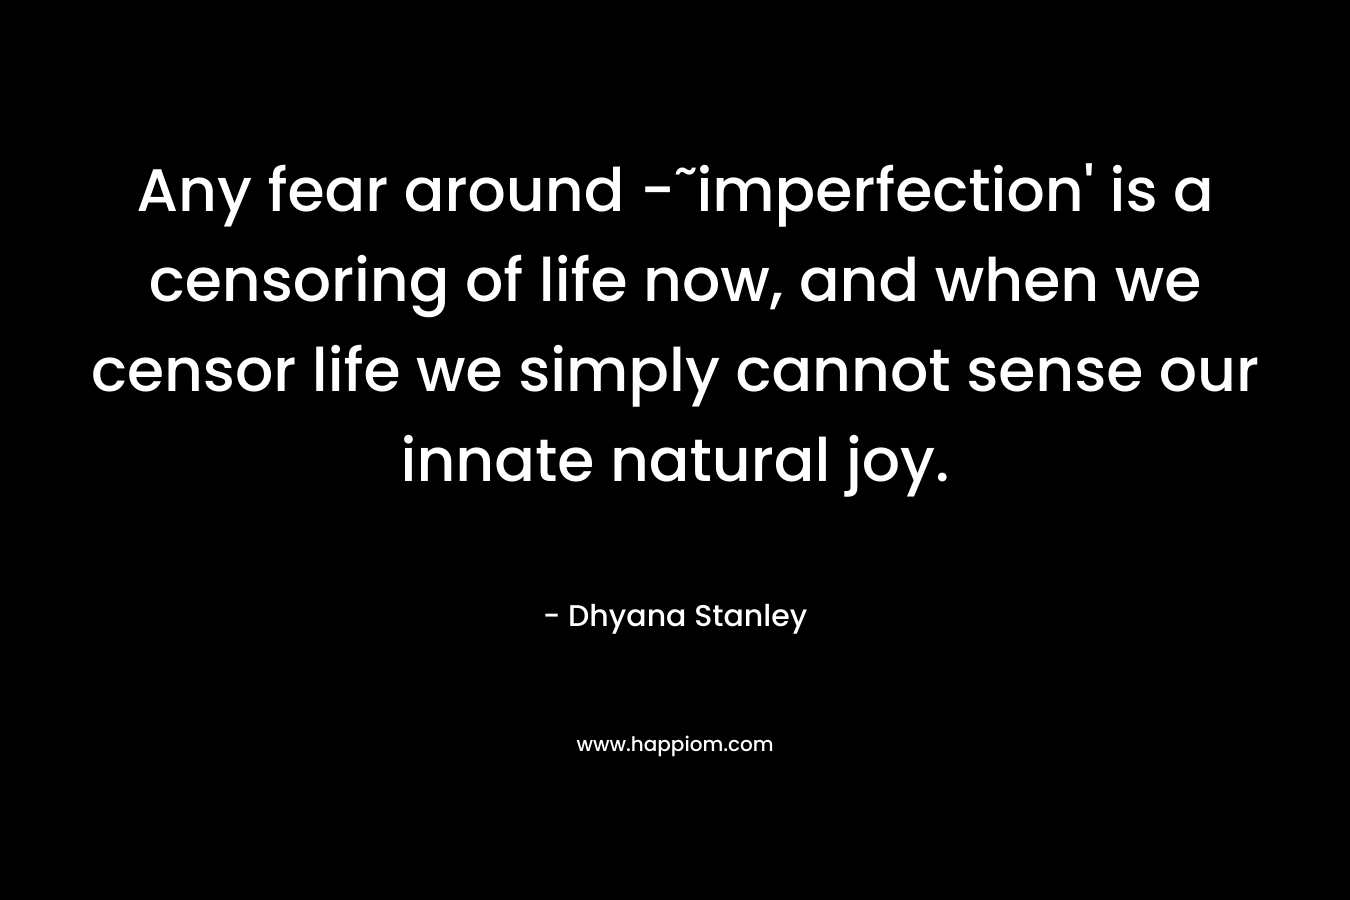 Any fear around -˜imperfection’ is a censoring of life now, and when we censor life we simply cannot sense our innate natural joy. – Dhyana Stanley